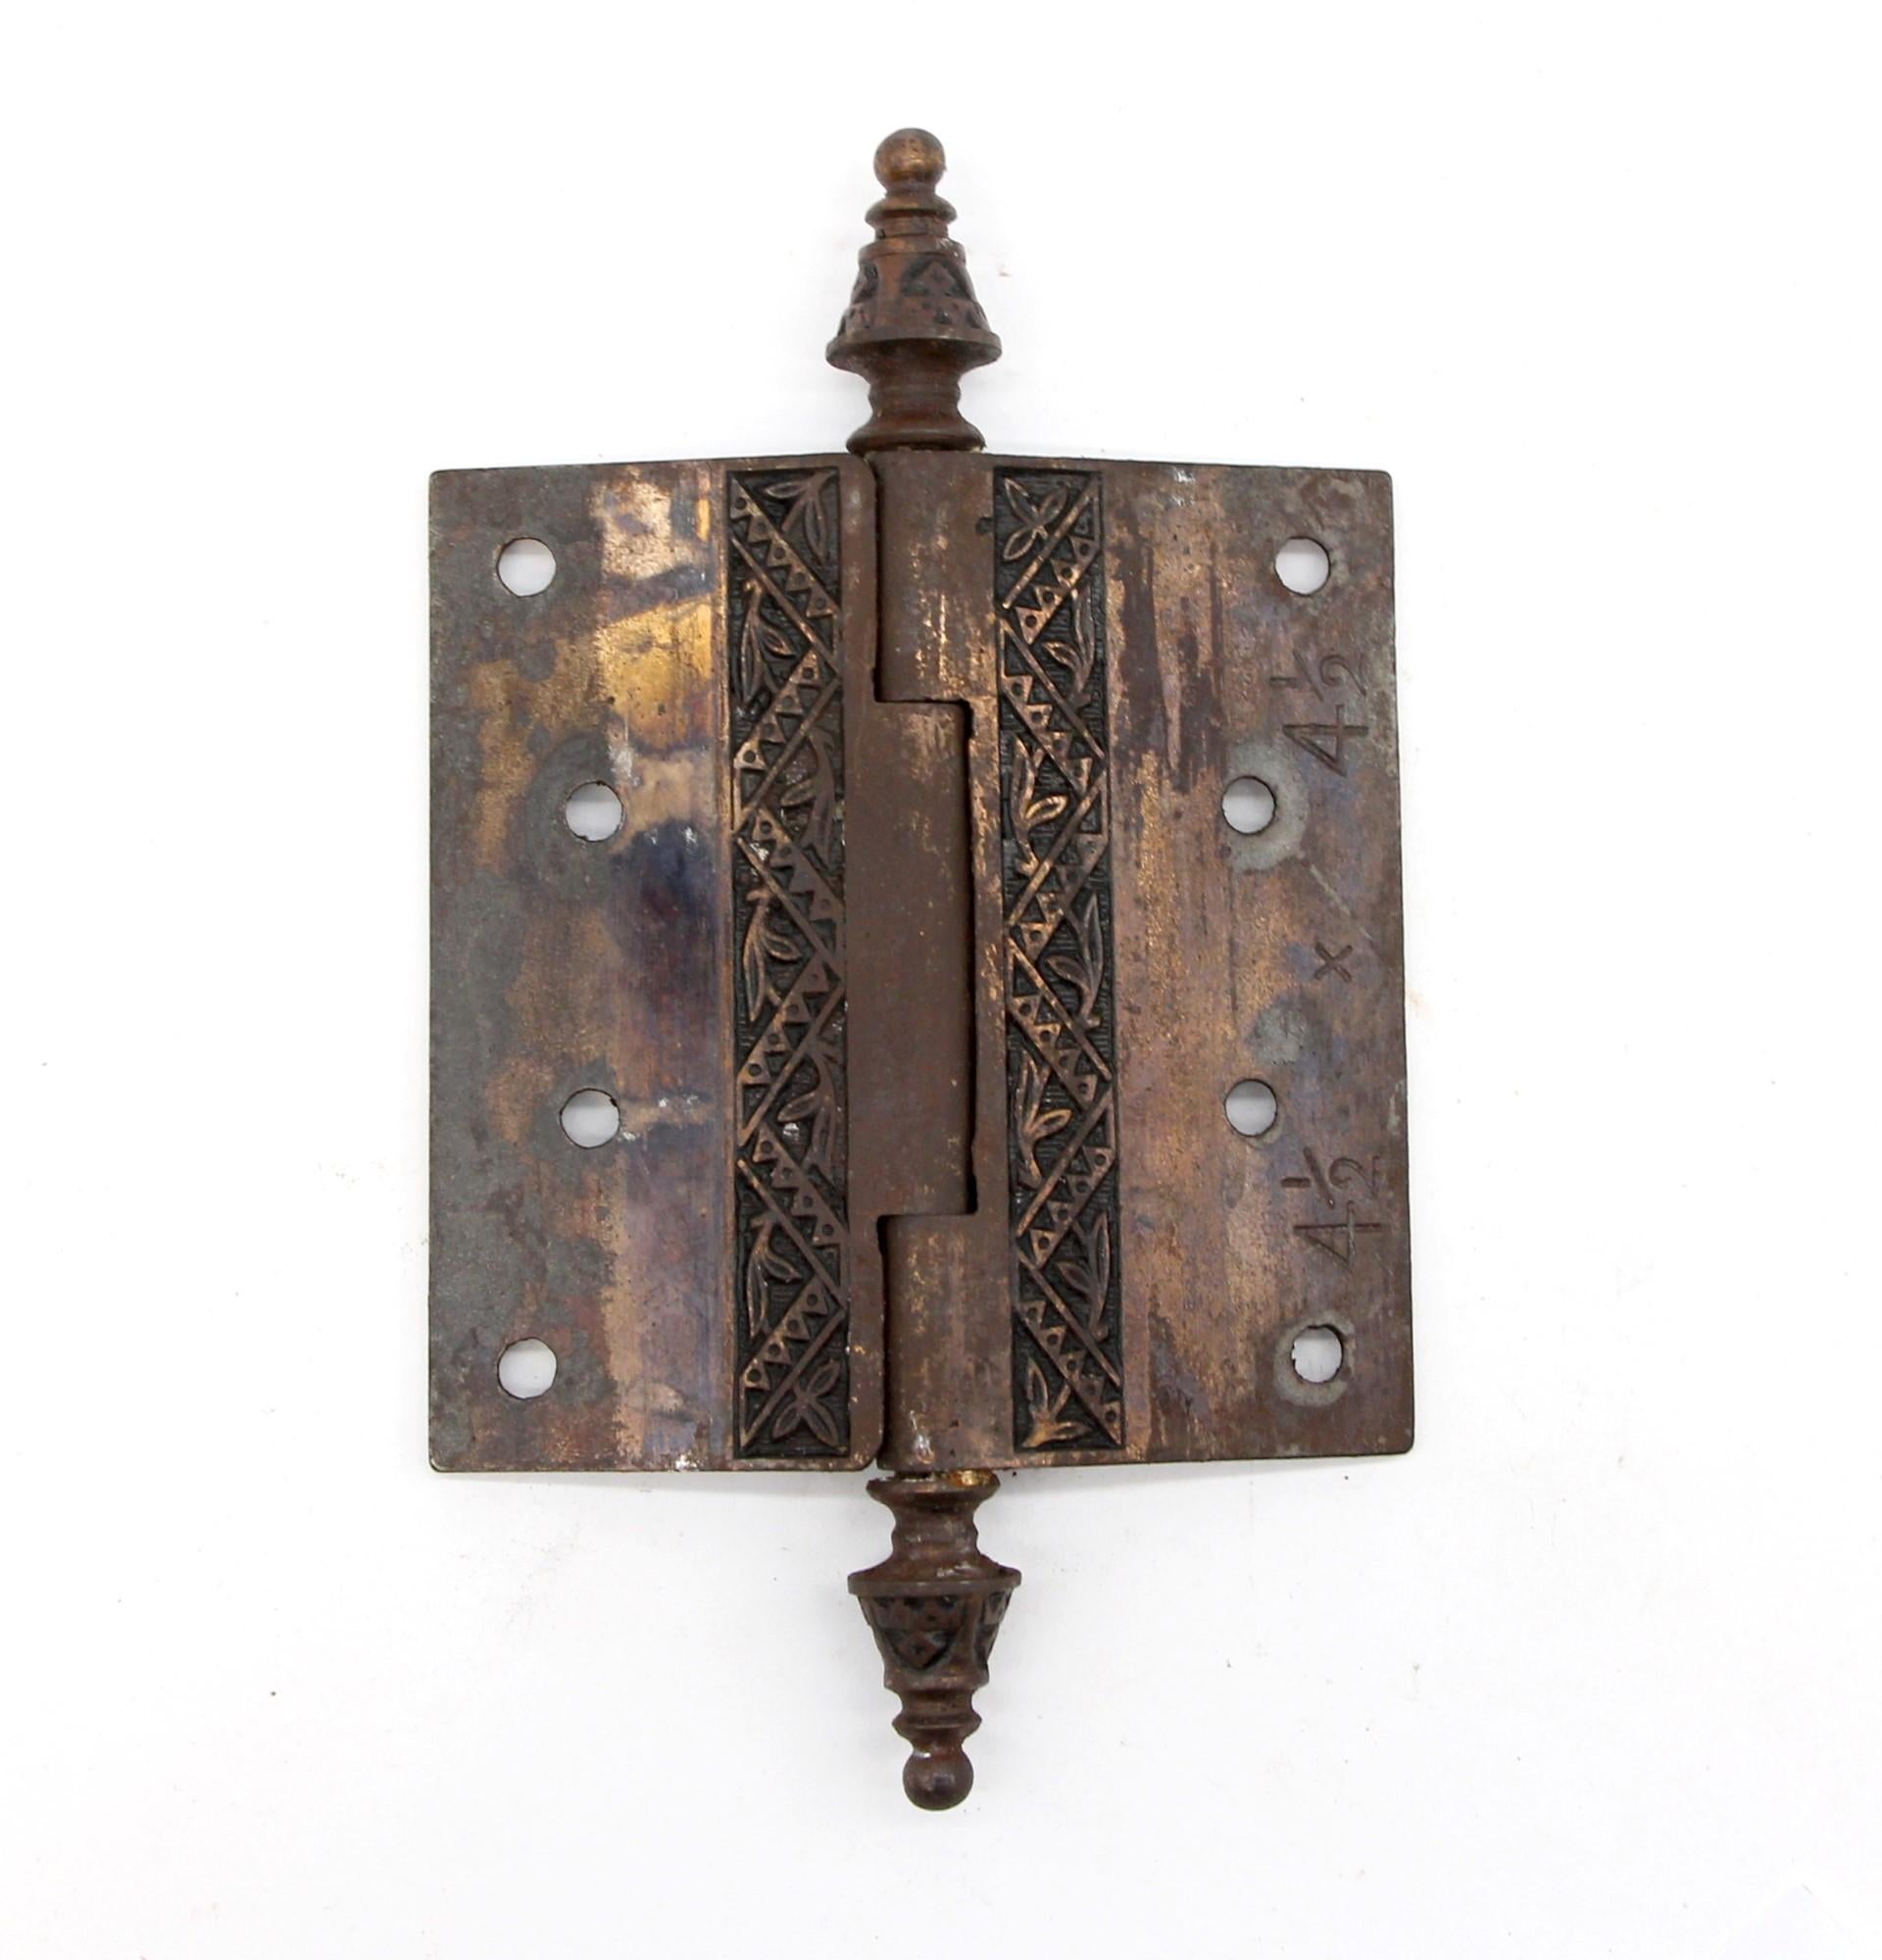 Early 20th century Floral Aesthetic style pintel butt antique door hinge with steeple tips and two knuckles. Small quantity available at time of posting. Priced each. Please inquire. Measures: 4.5 x 4.5. Please note, this item is located in our